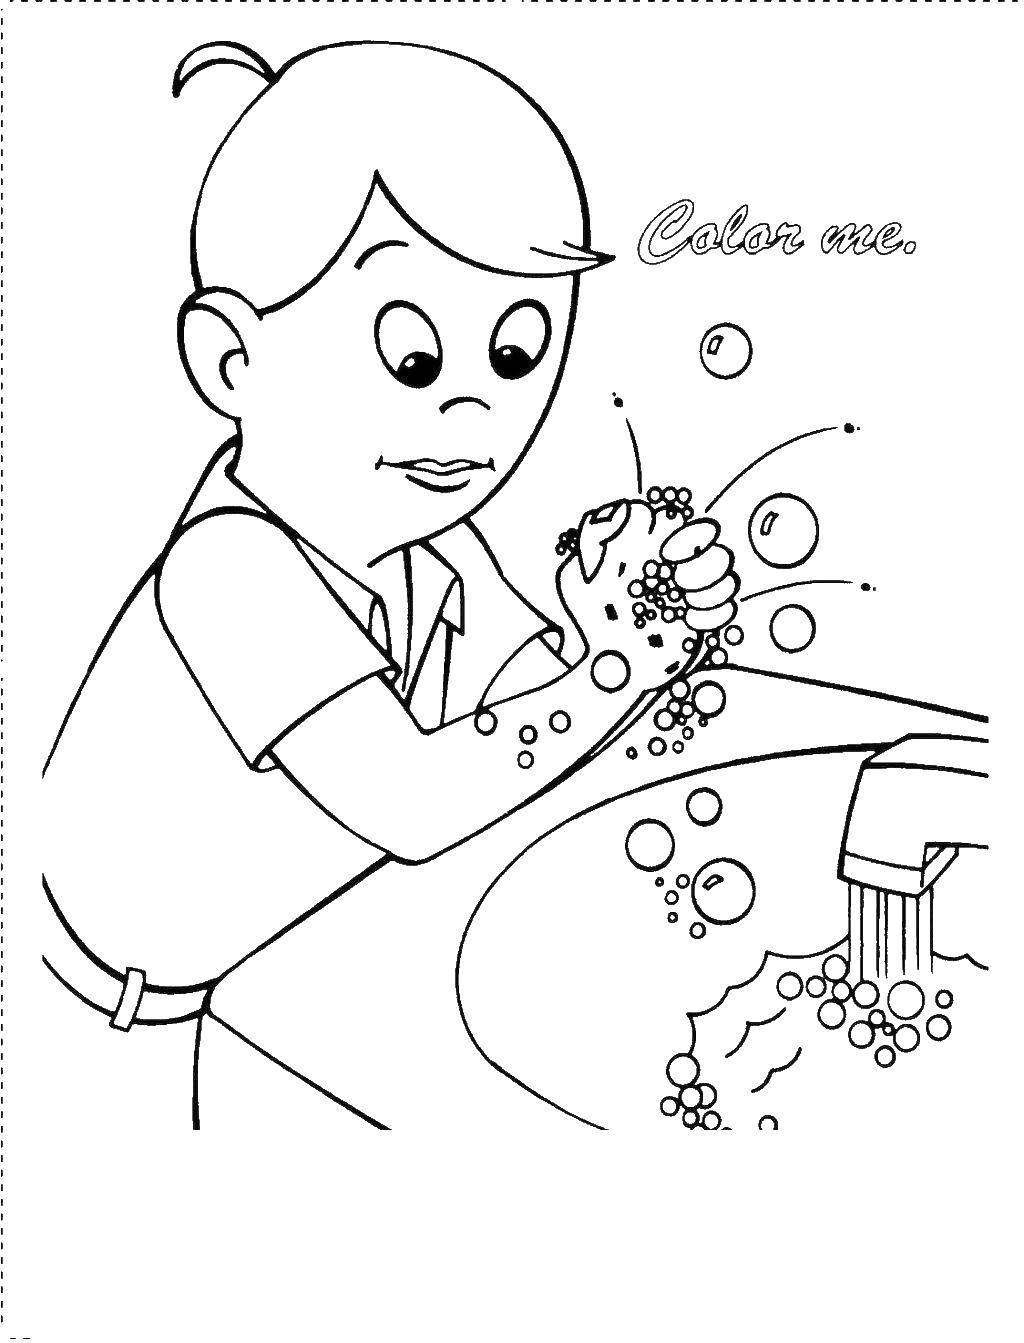 Online coloring pages coloring page hand washing wash download print coloring page